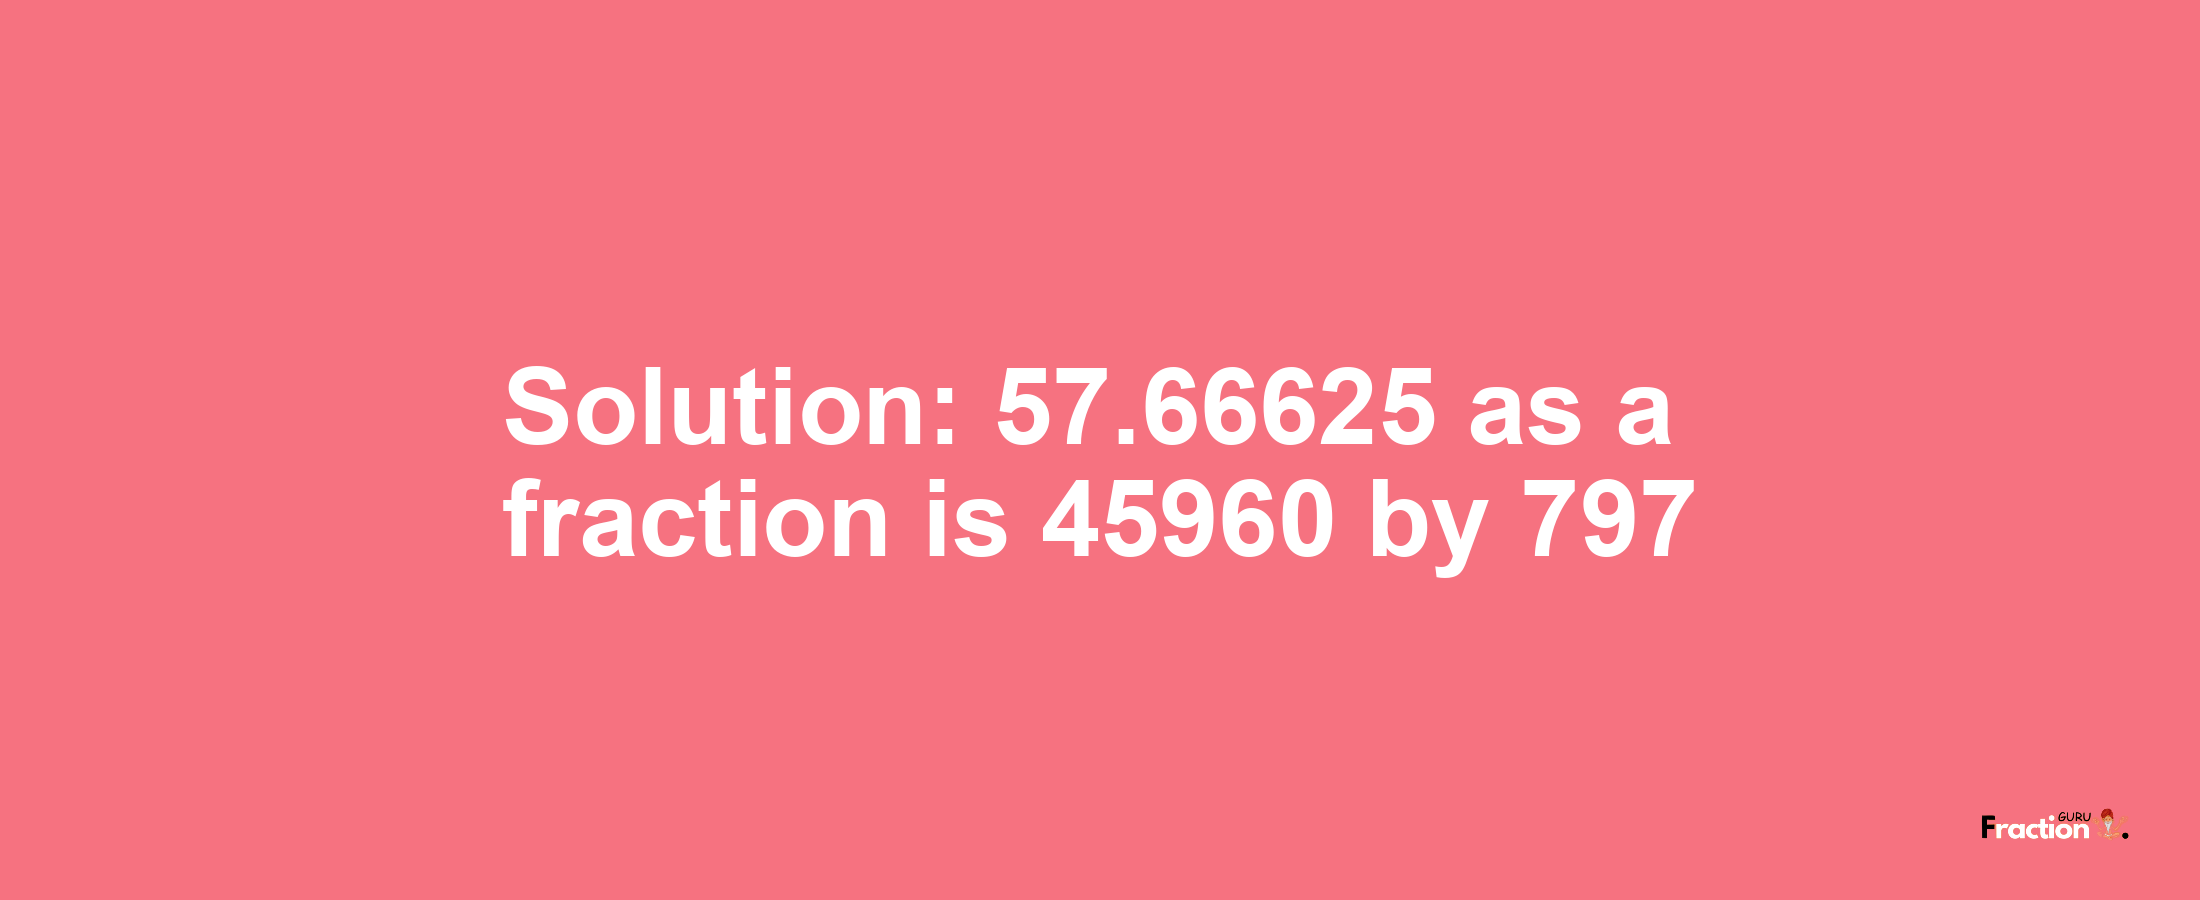 Solution:57.66625 as a fraction is 45960/797